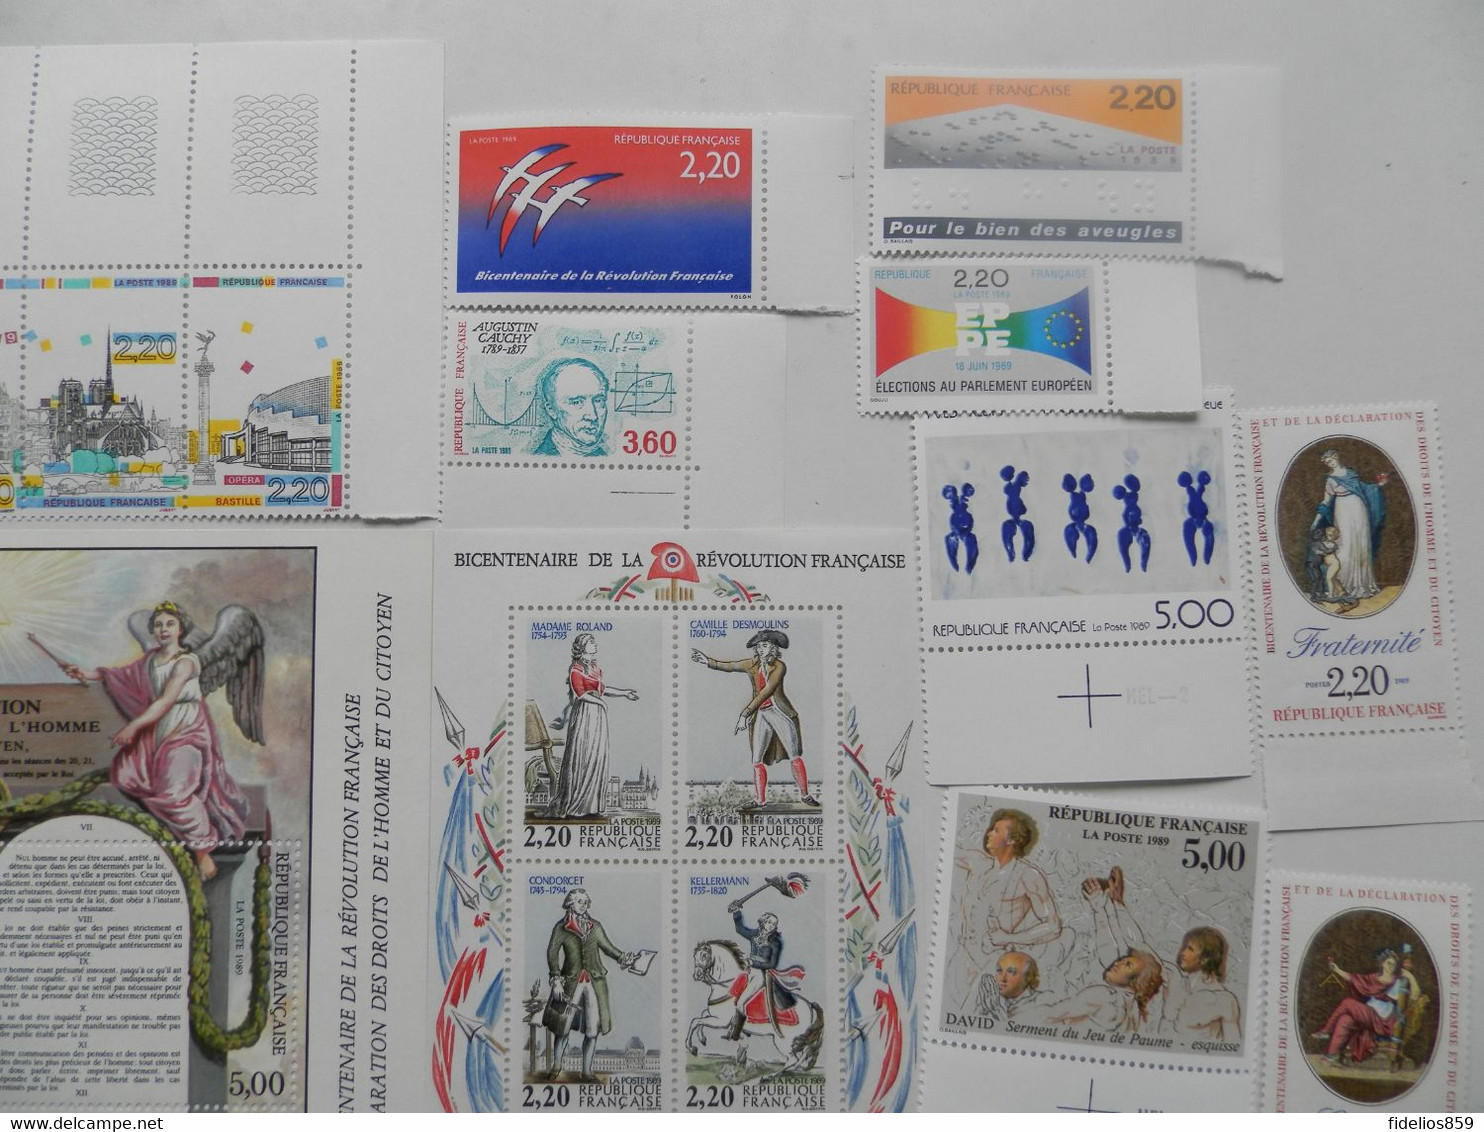 FRANCE ANNEE COMPLETE 1989 SOIT 48 TIMBRES ET 2BLOCS NEUFS SANS CHARNIERE NI TRACE LUXE - 1980-1989